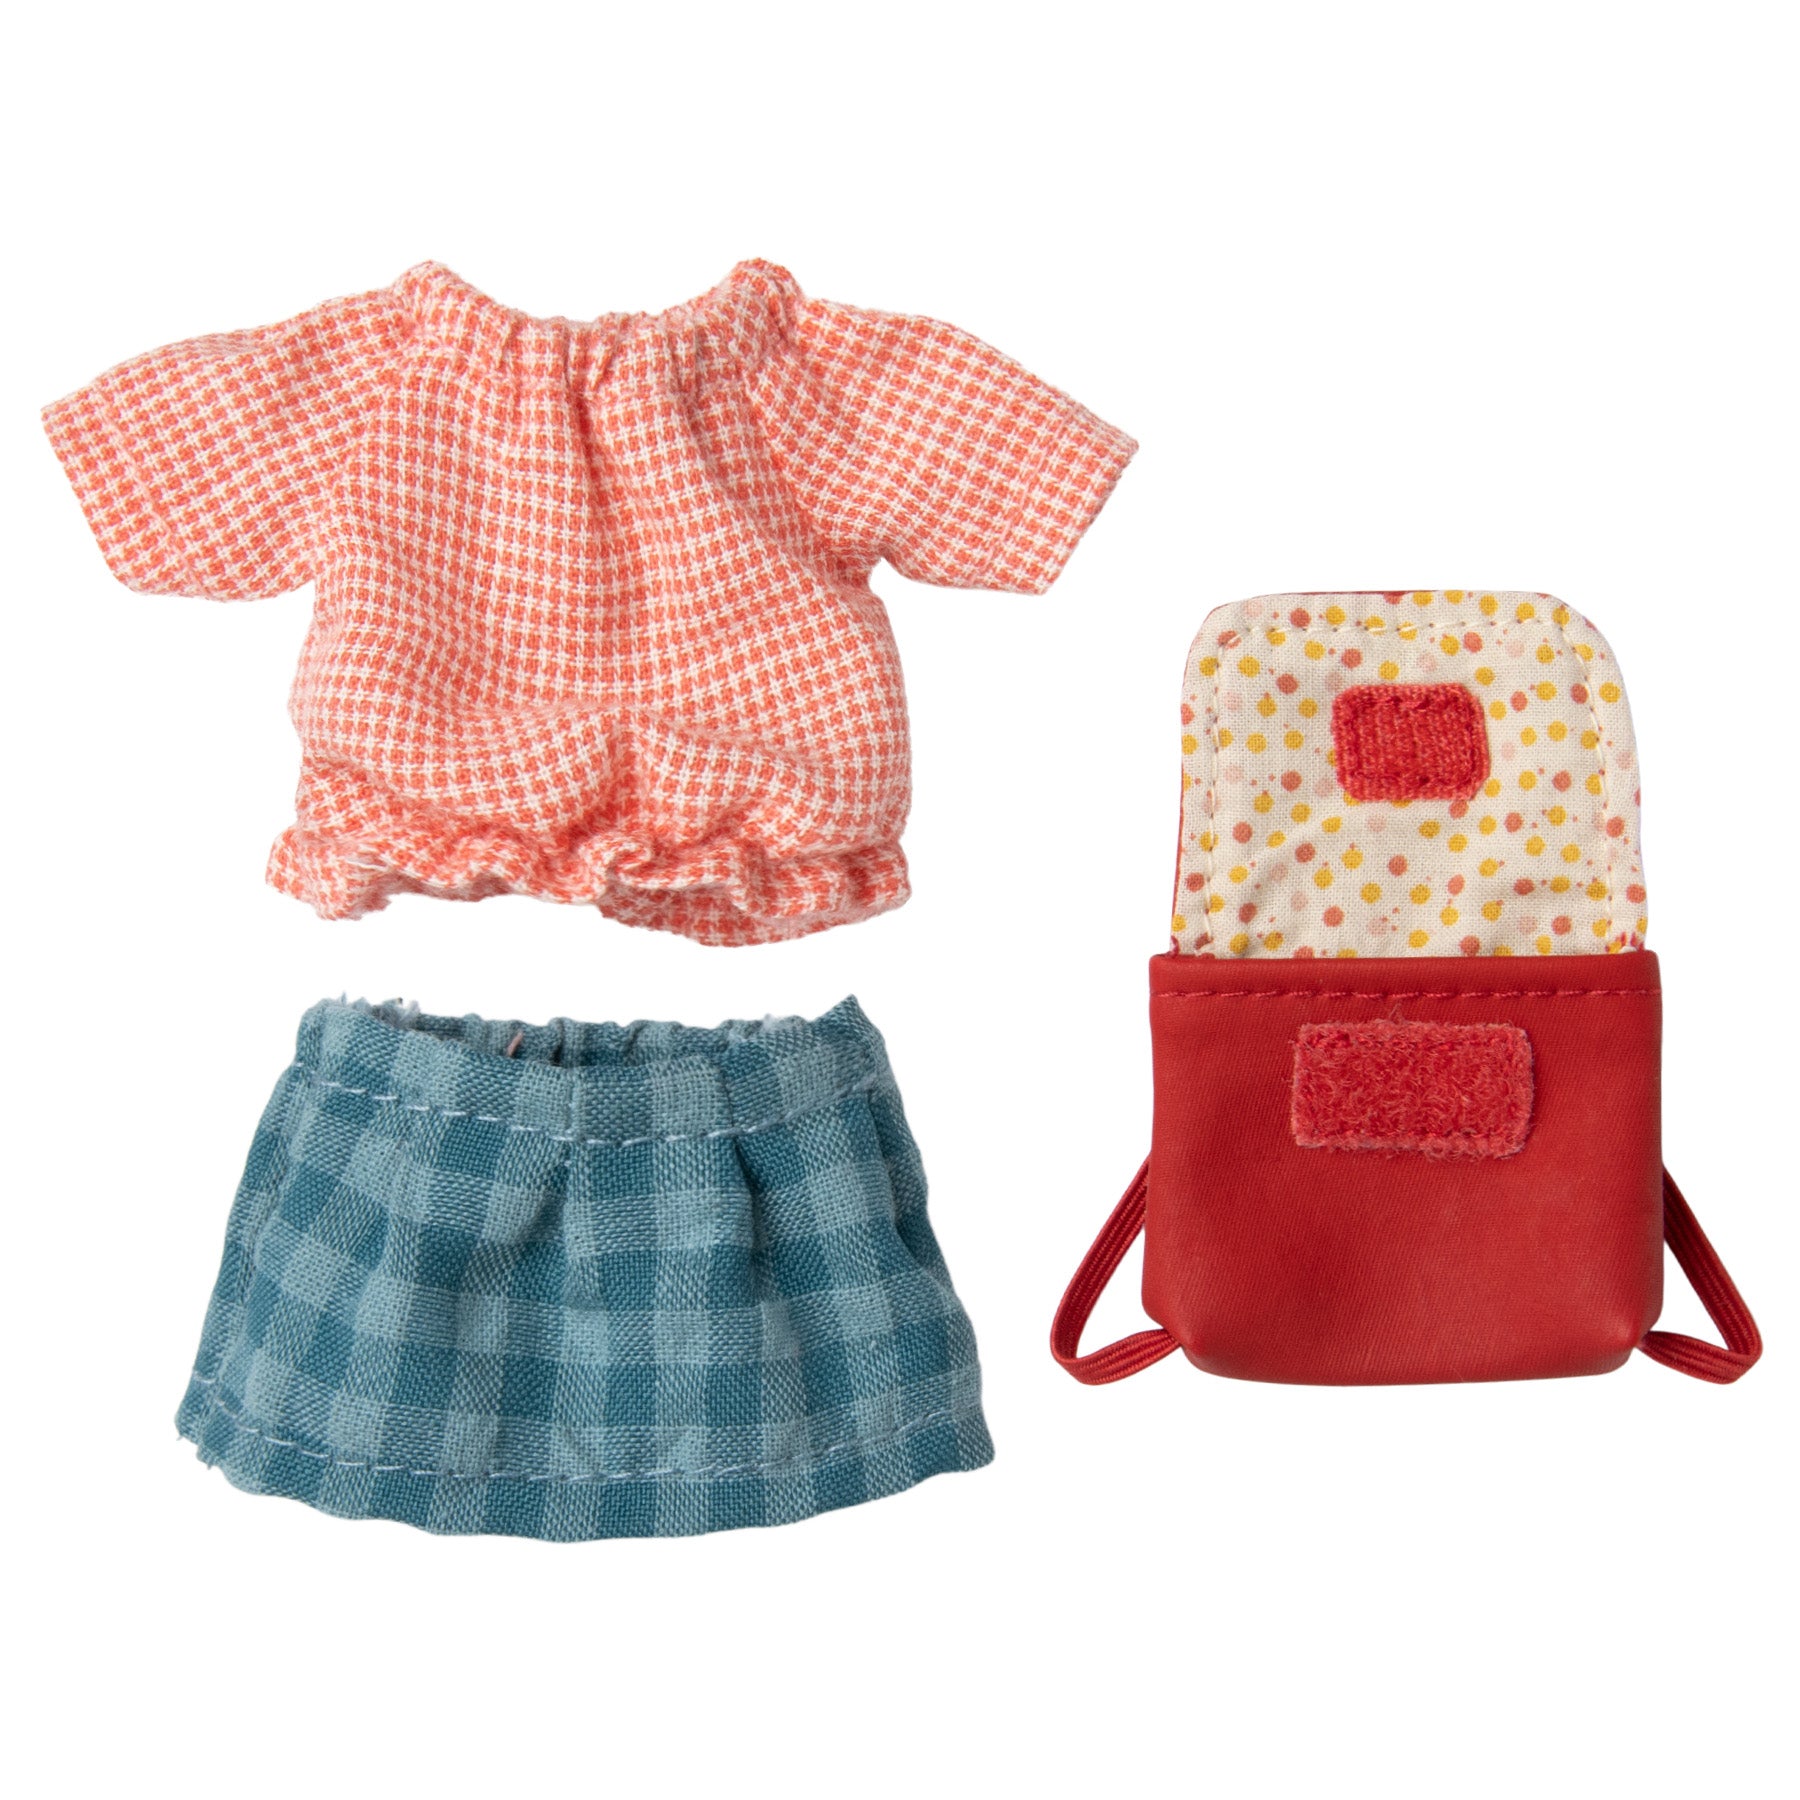 maileg mouse clothes - red check blouser, check blue skirt and red rucksack. These accessories are suitable for big sister mice